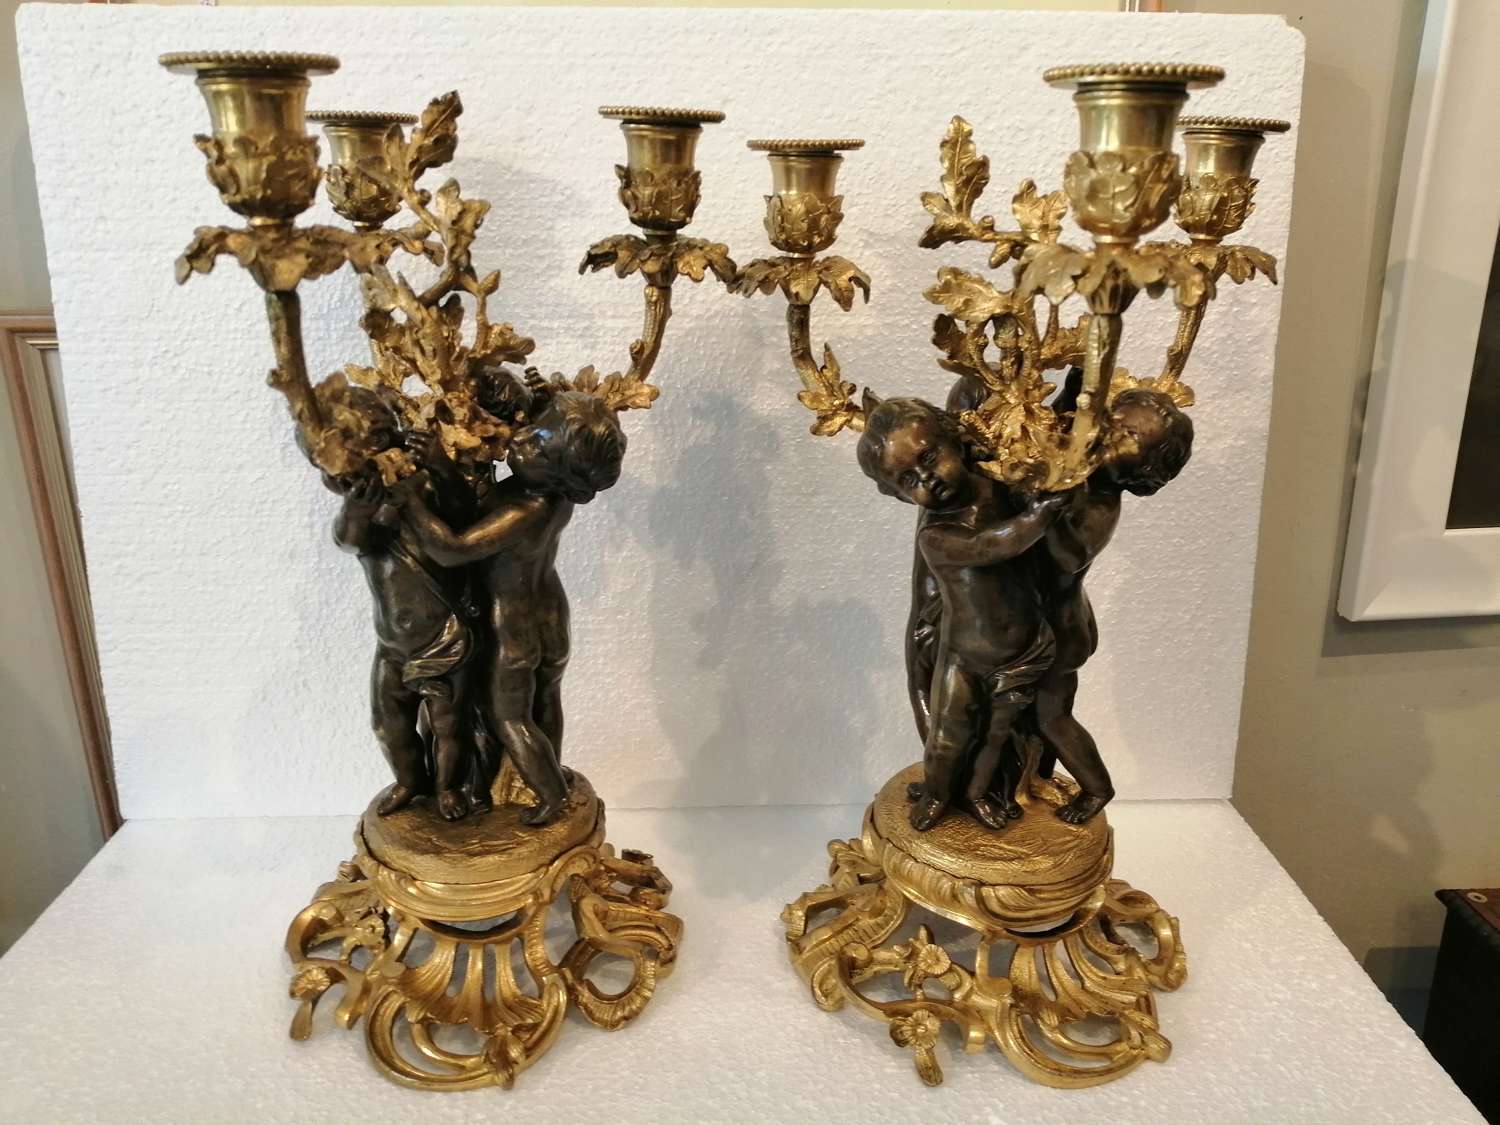 A lovely pair of French 19th century bronze & ormulu candelabra